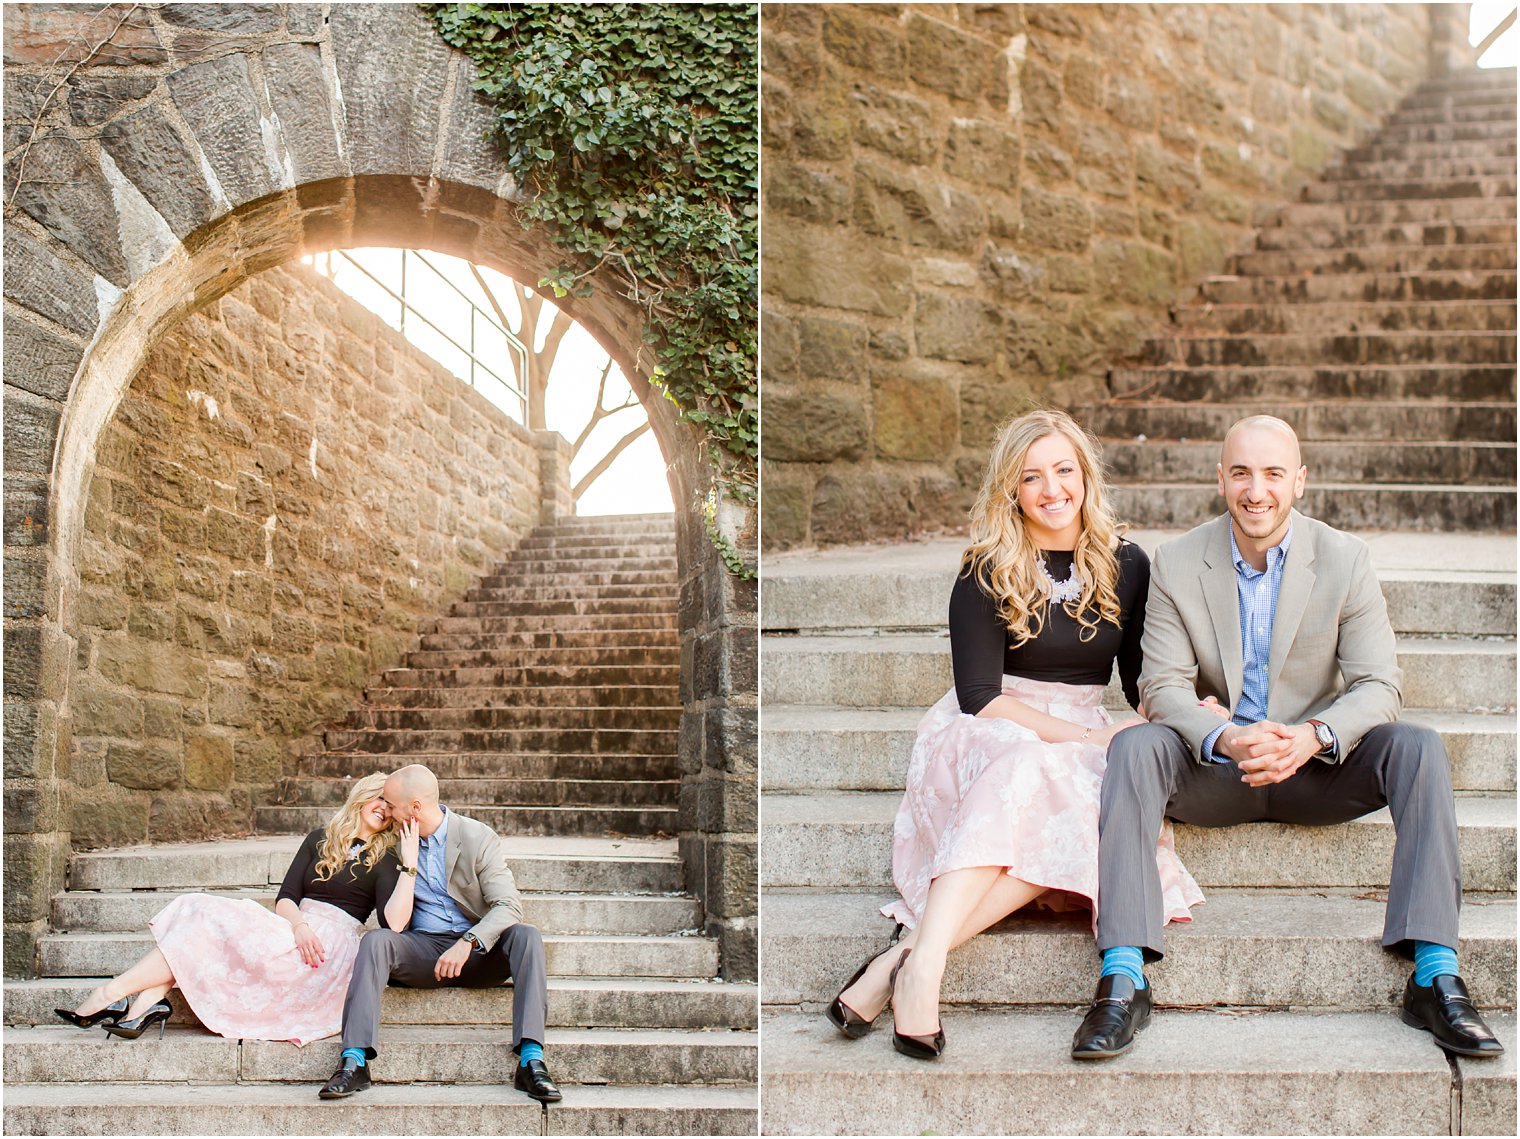 Elegant outfit ideas for engagement session | Photos by Idalia Photography